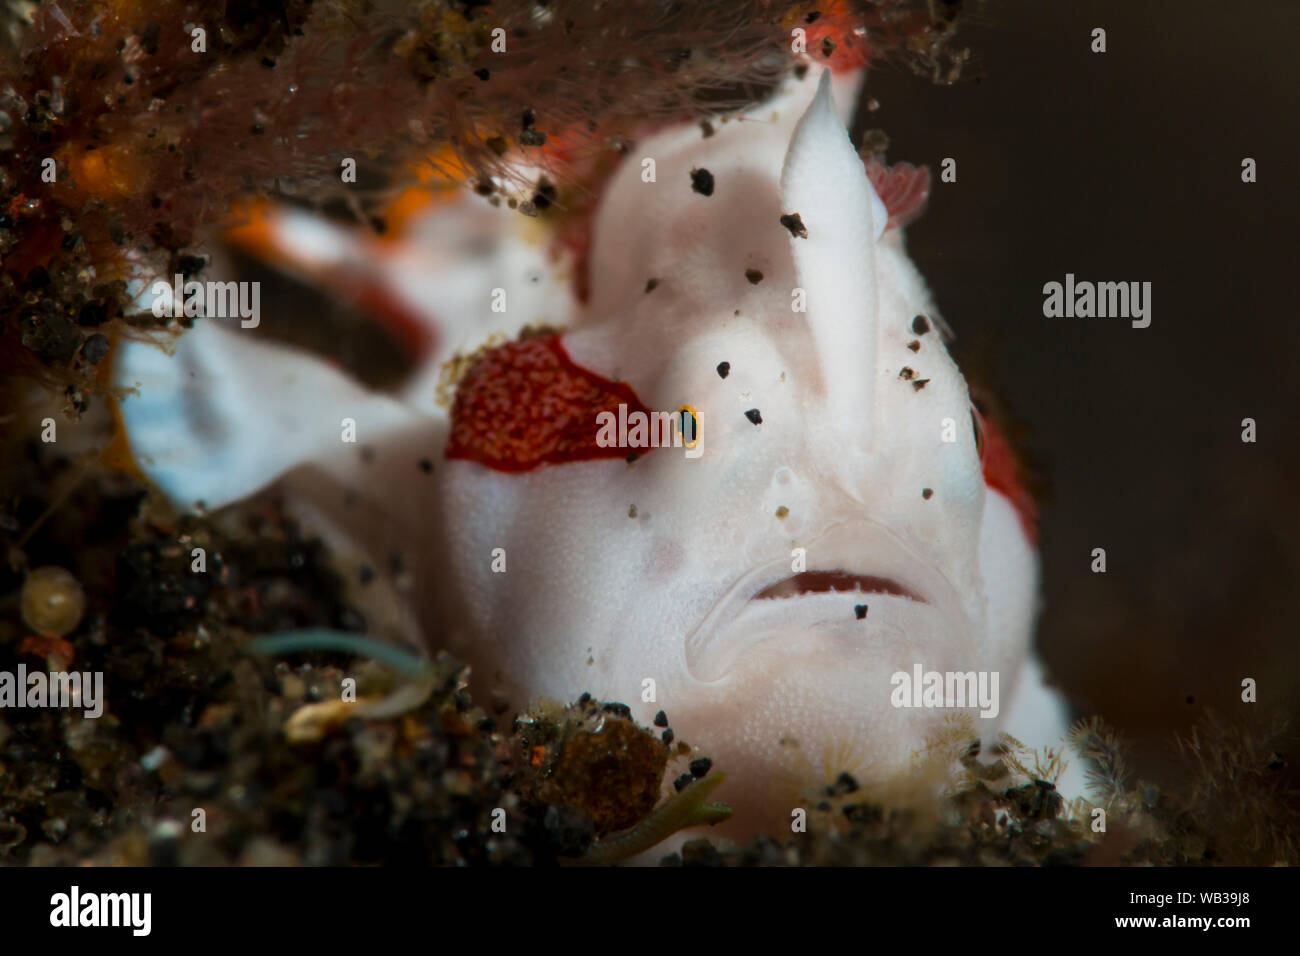 Tiny Juvenile Clown Frogfish in Black Volcanic Sand, Bali Indonesia Stock Photo